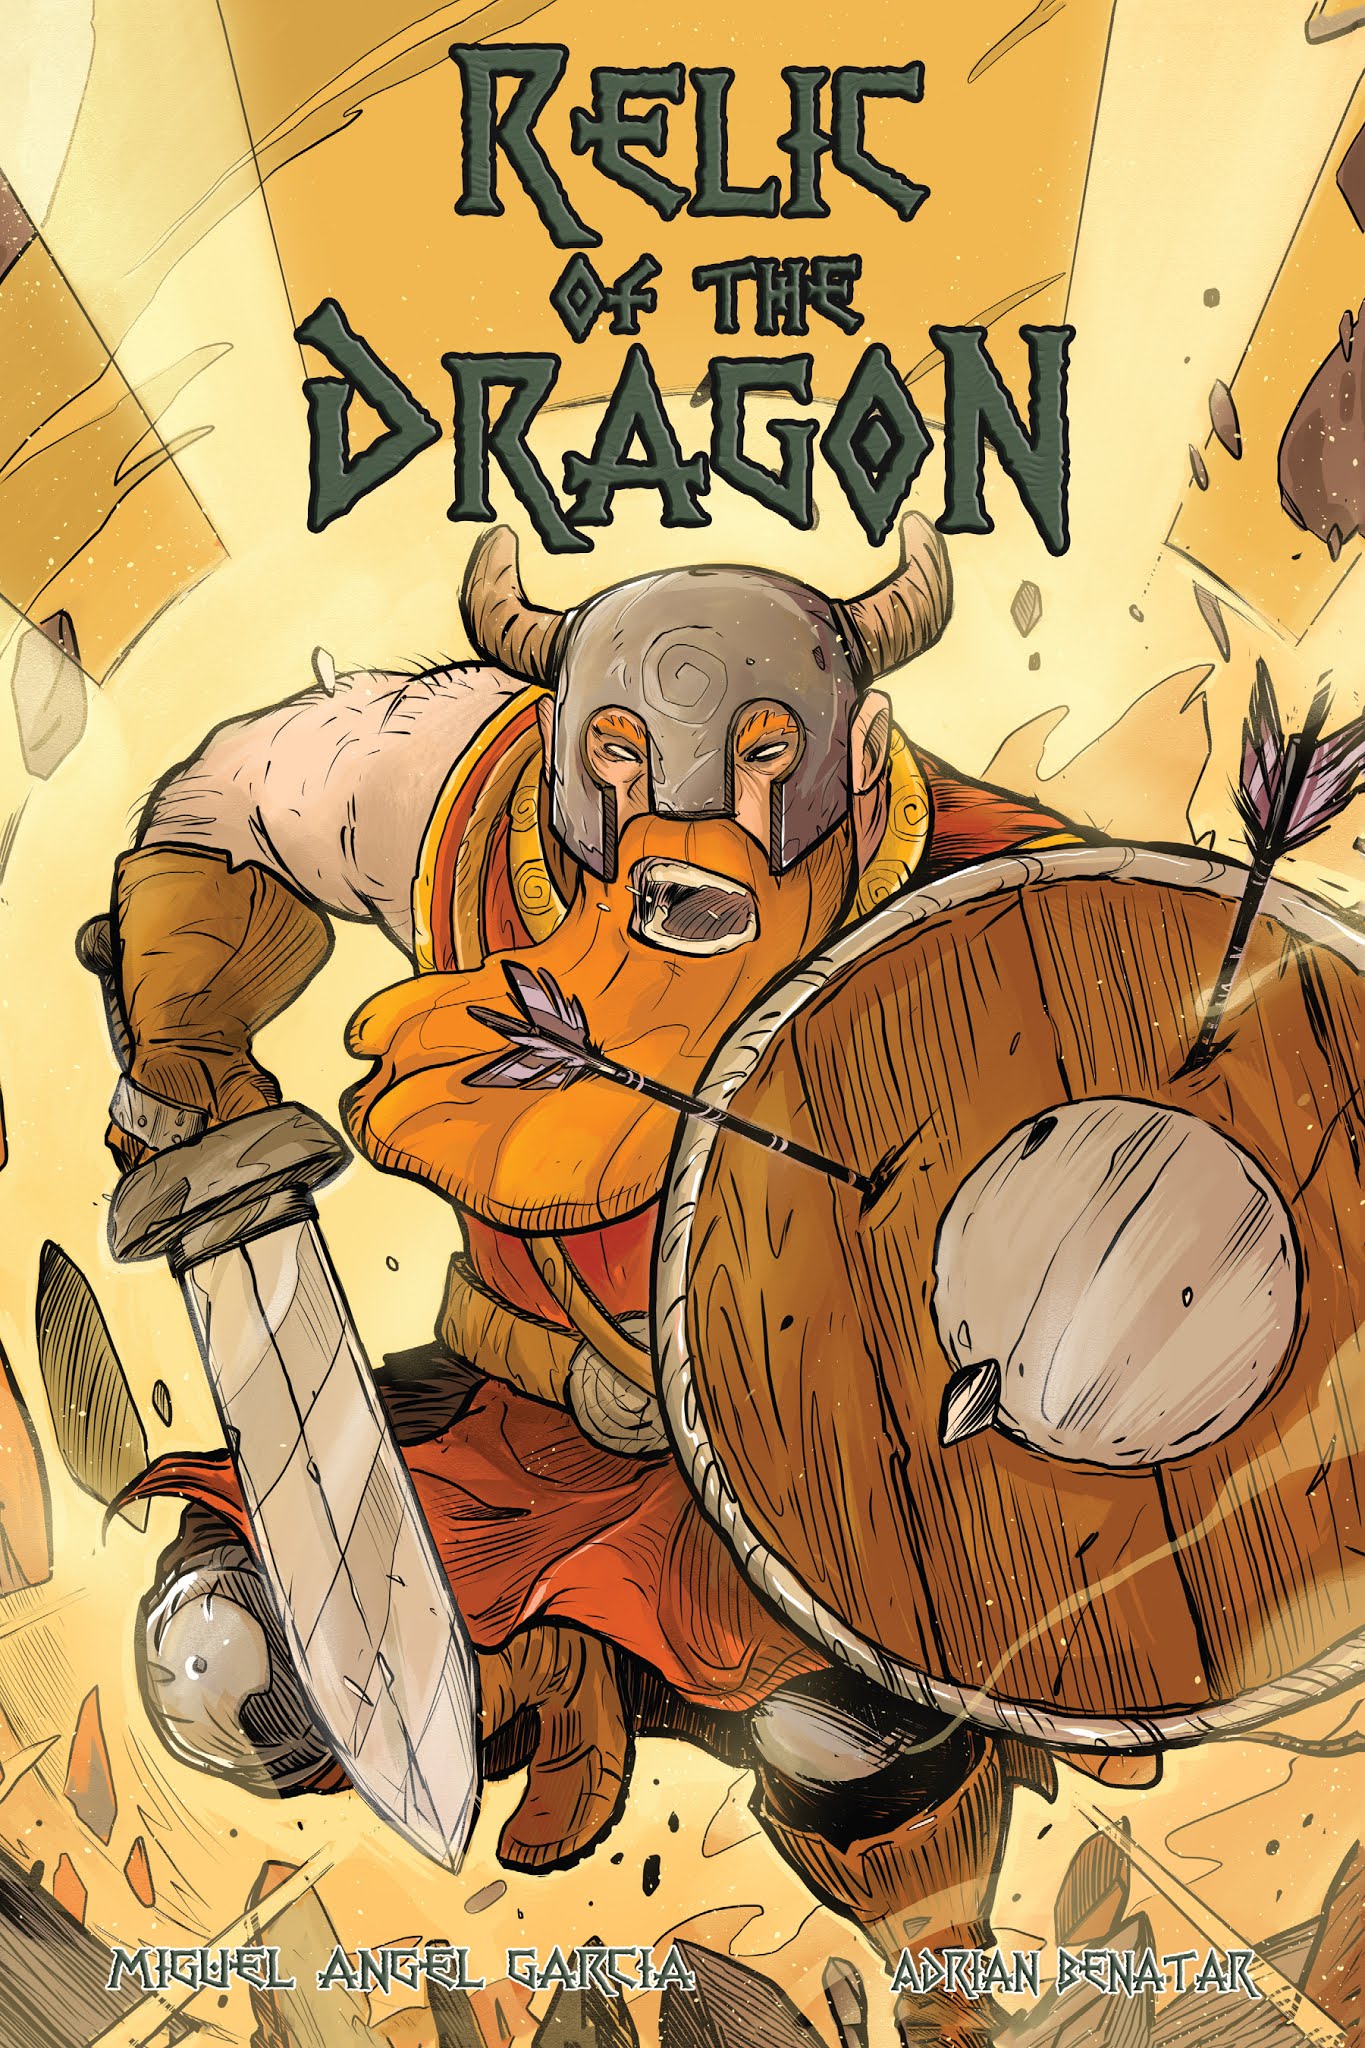 Read online Relic of the Dragon comic -  Issue # Full - 1